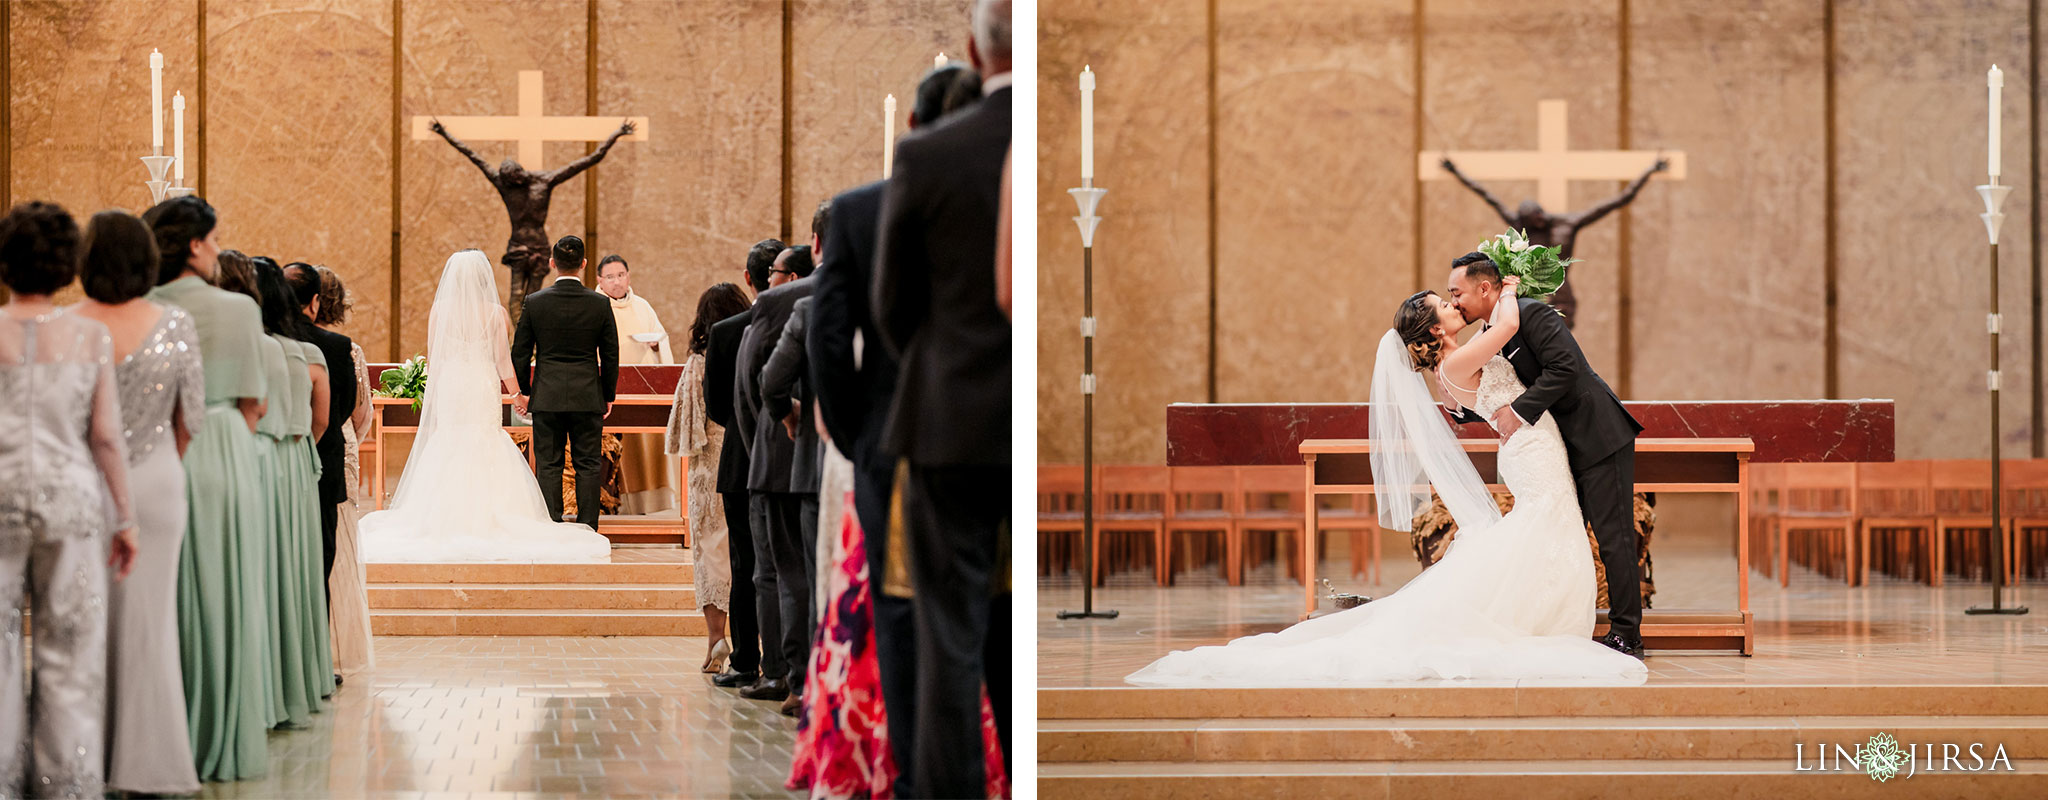 025 cathedral of our lady of angels los angeles wedding ceremony photography